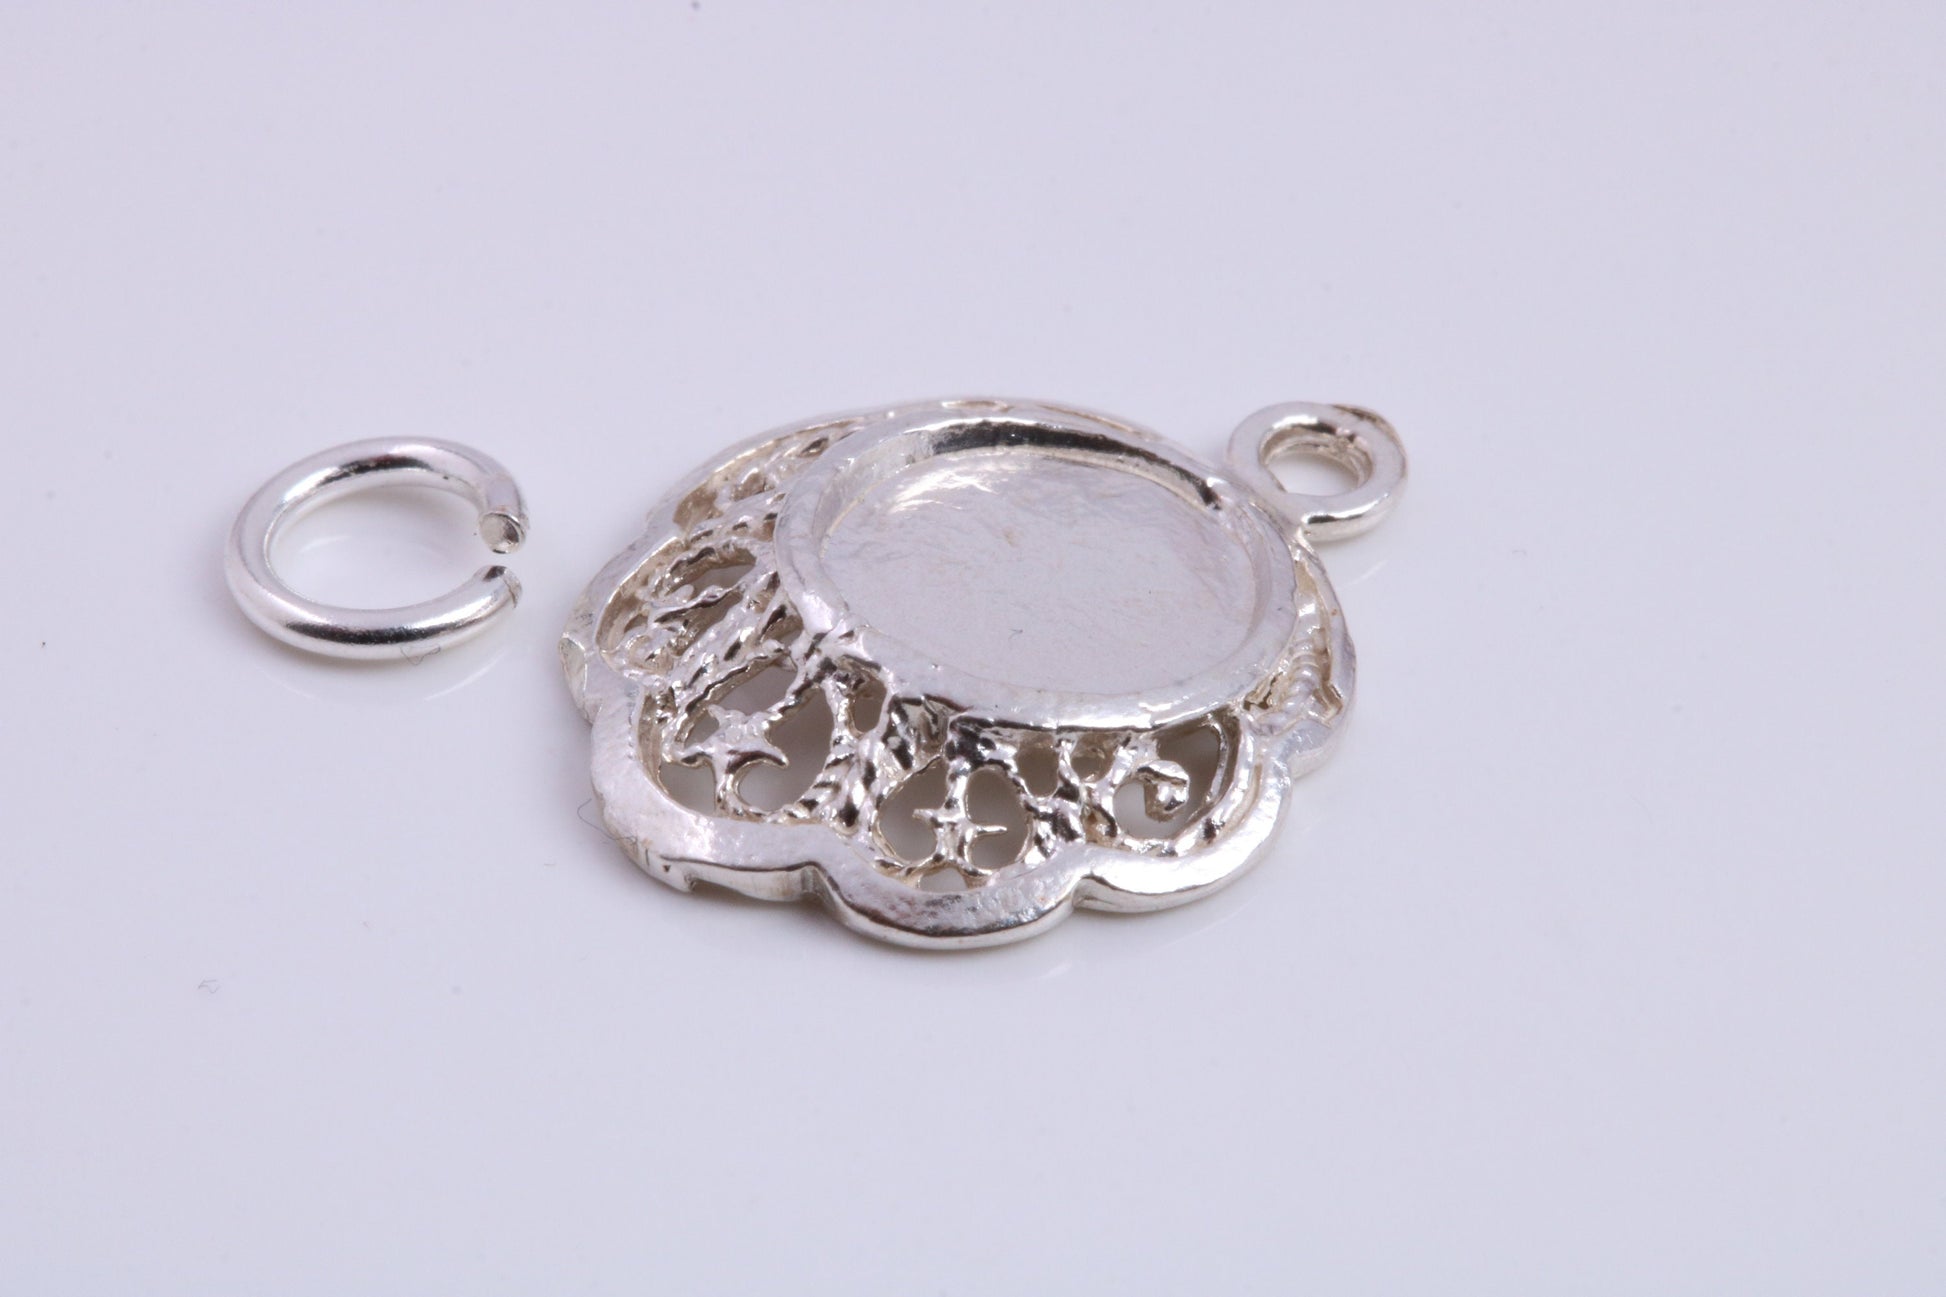 Vintage Mirror Charm, Traditional Charm, Made from Solid 925 Grade Sterling Silver, Complete with Attachment Link